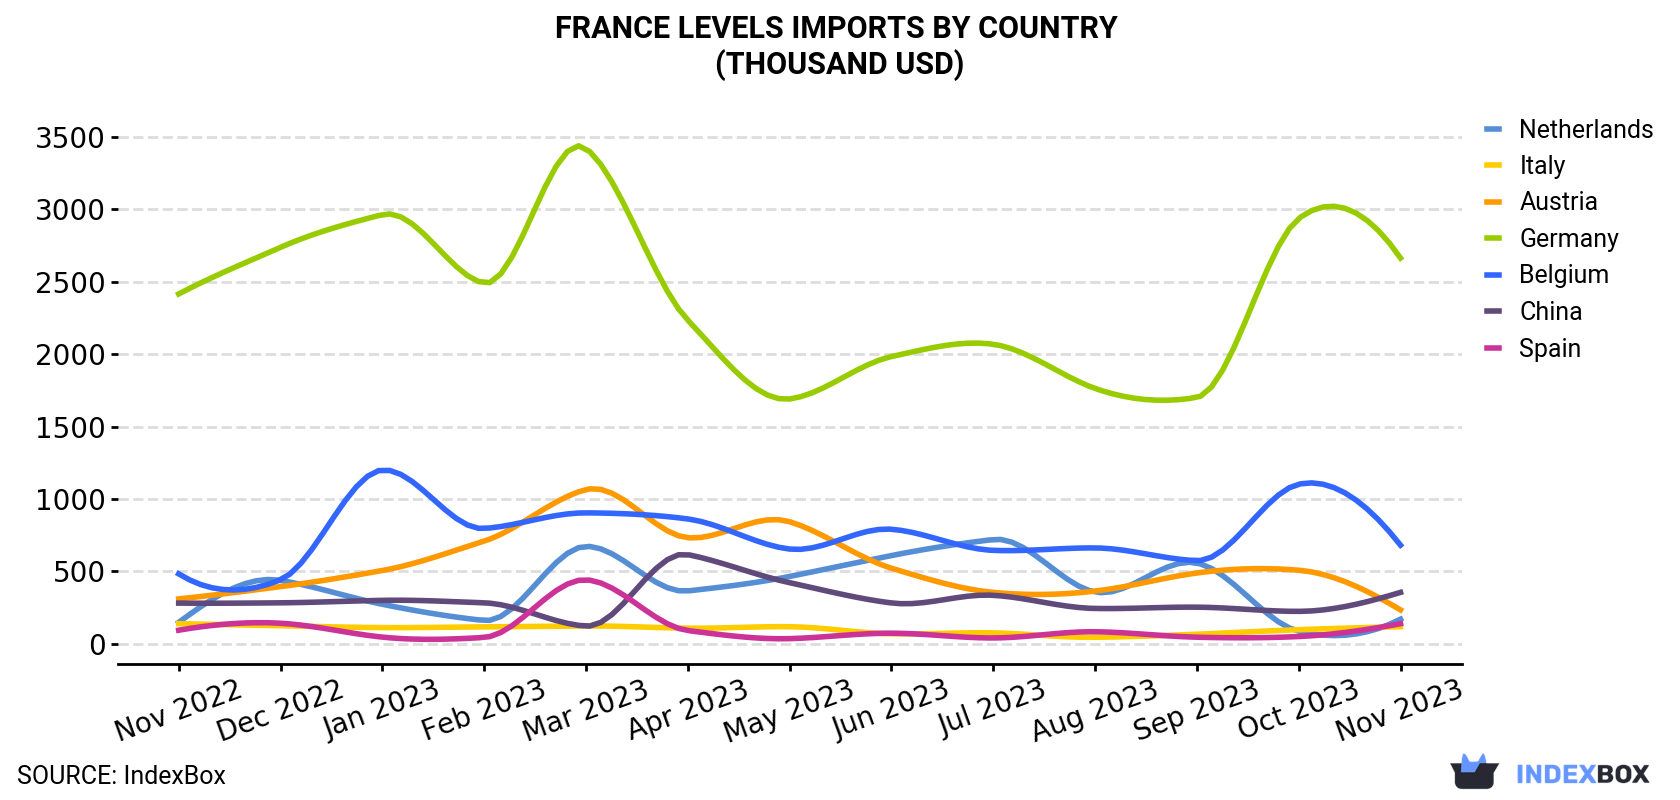 France Levels Imports By Country (Thousand USD)